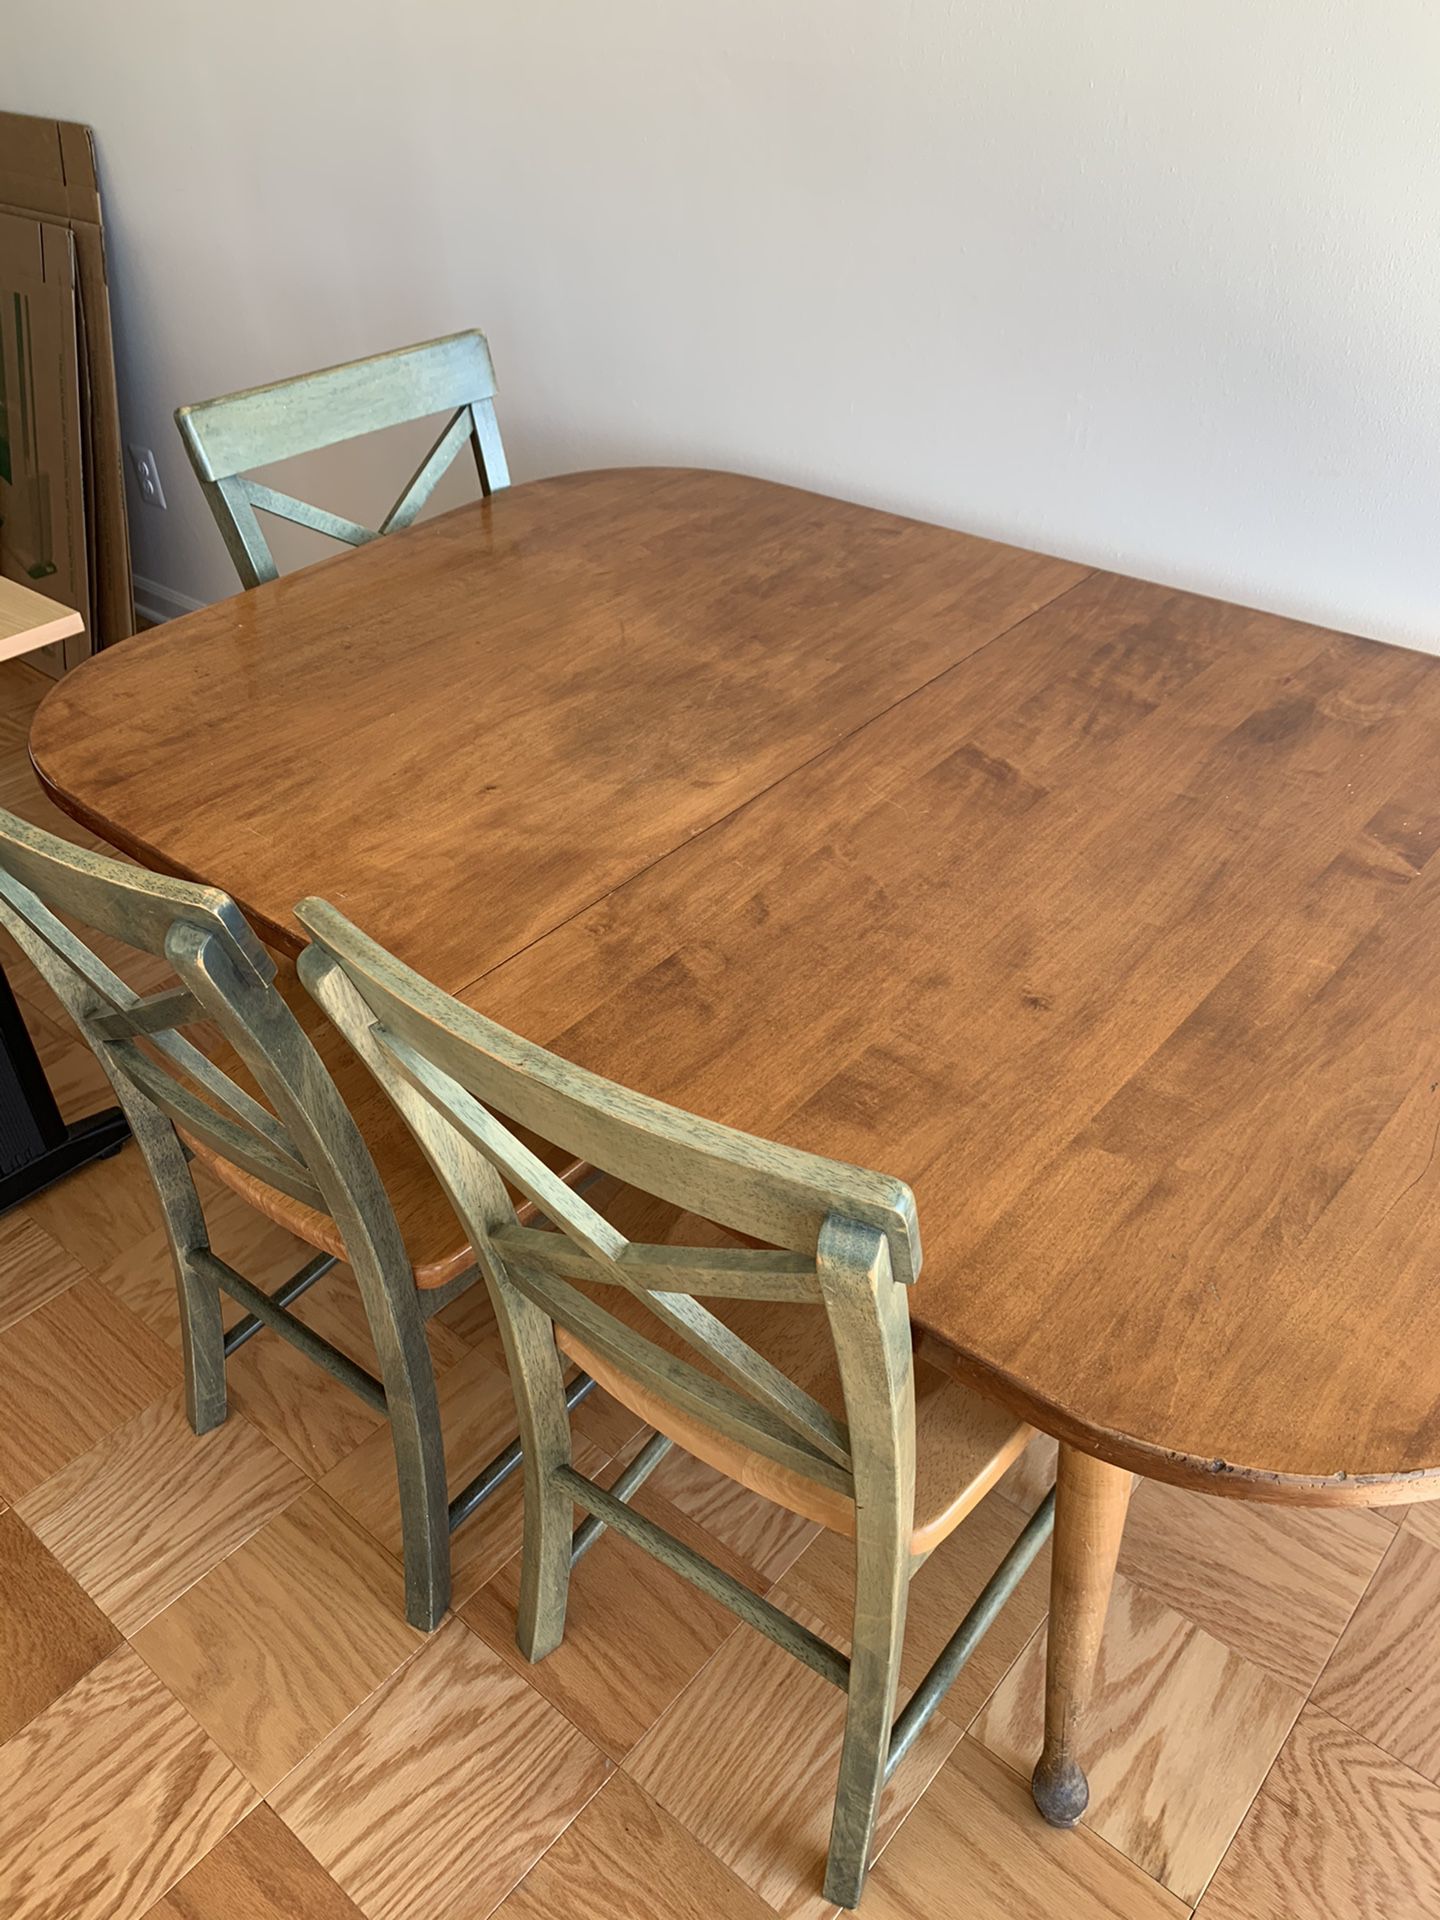 Kitchen table and 4 chairs